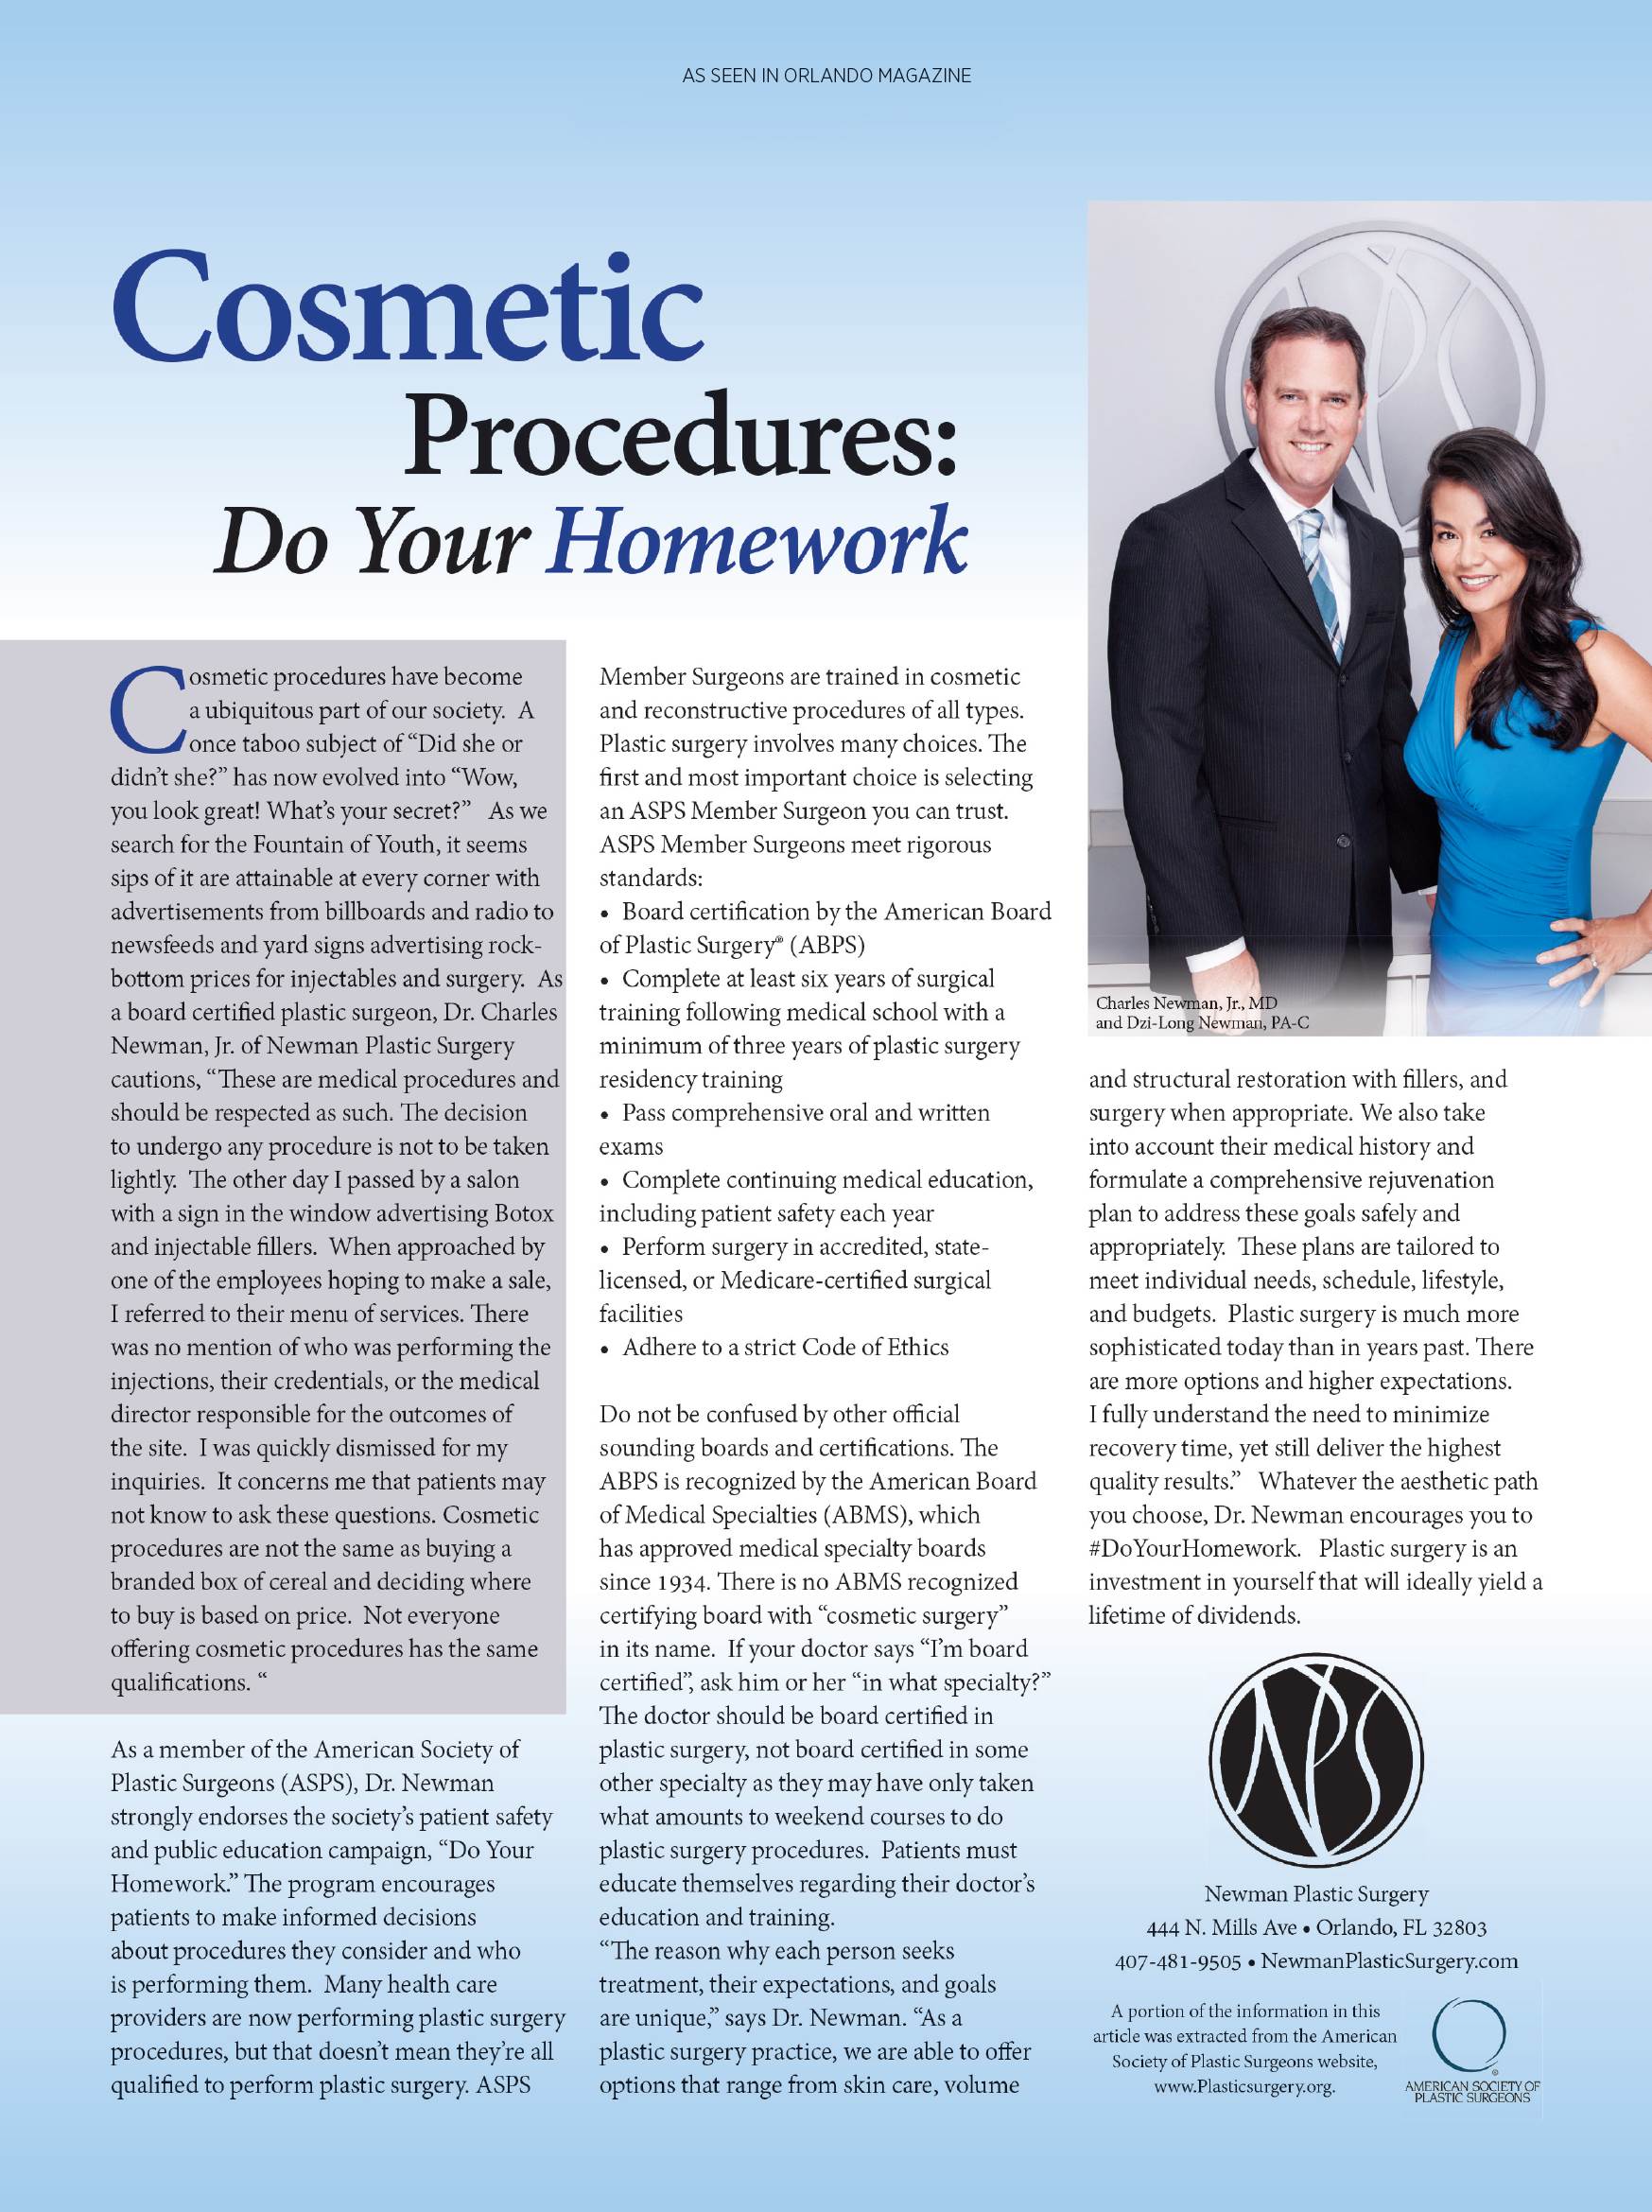 Cosmetic Surgery: Do Your Homework